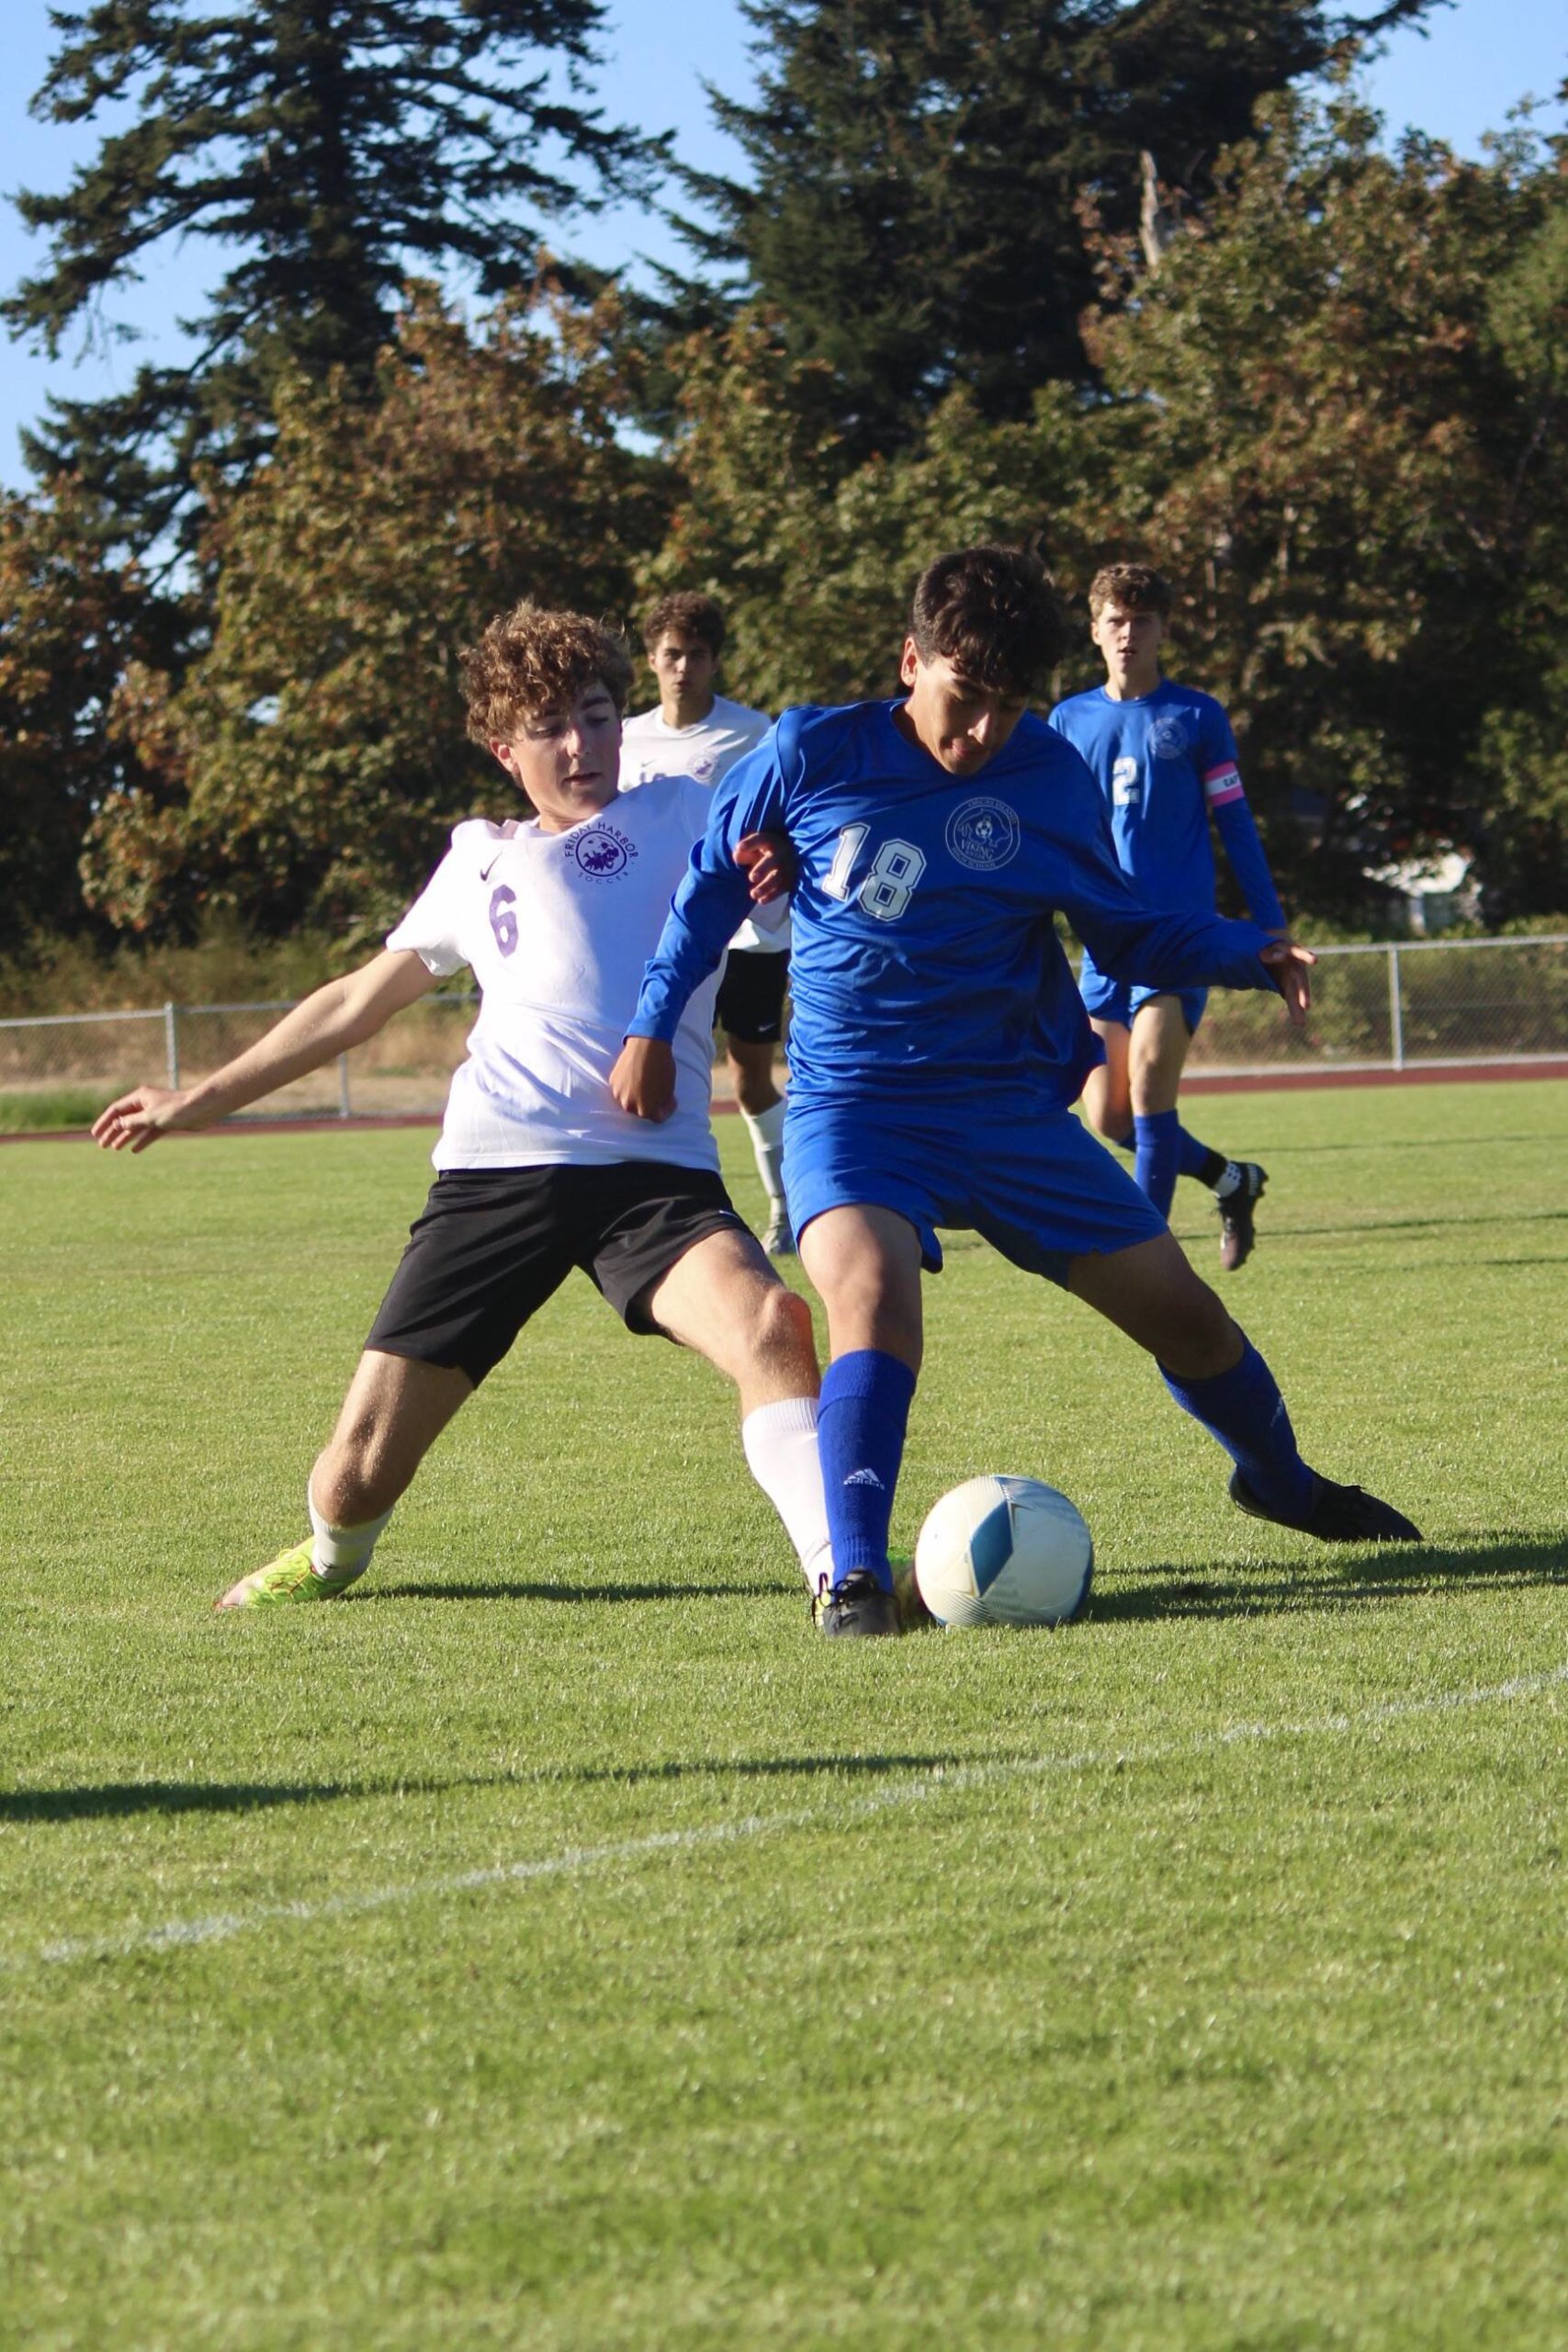 Corey Wiscomb photo
Freshman Joaquin Shanks Morales battles for position. The freshman has proved himself as a dependable role player for the Vikings. Morales had a fabulous shot on goal in the overtime period that was barely stopped by the Friday Harbor Keeper.